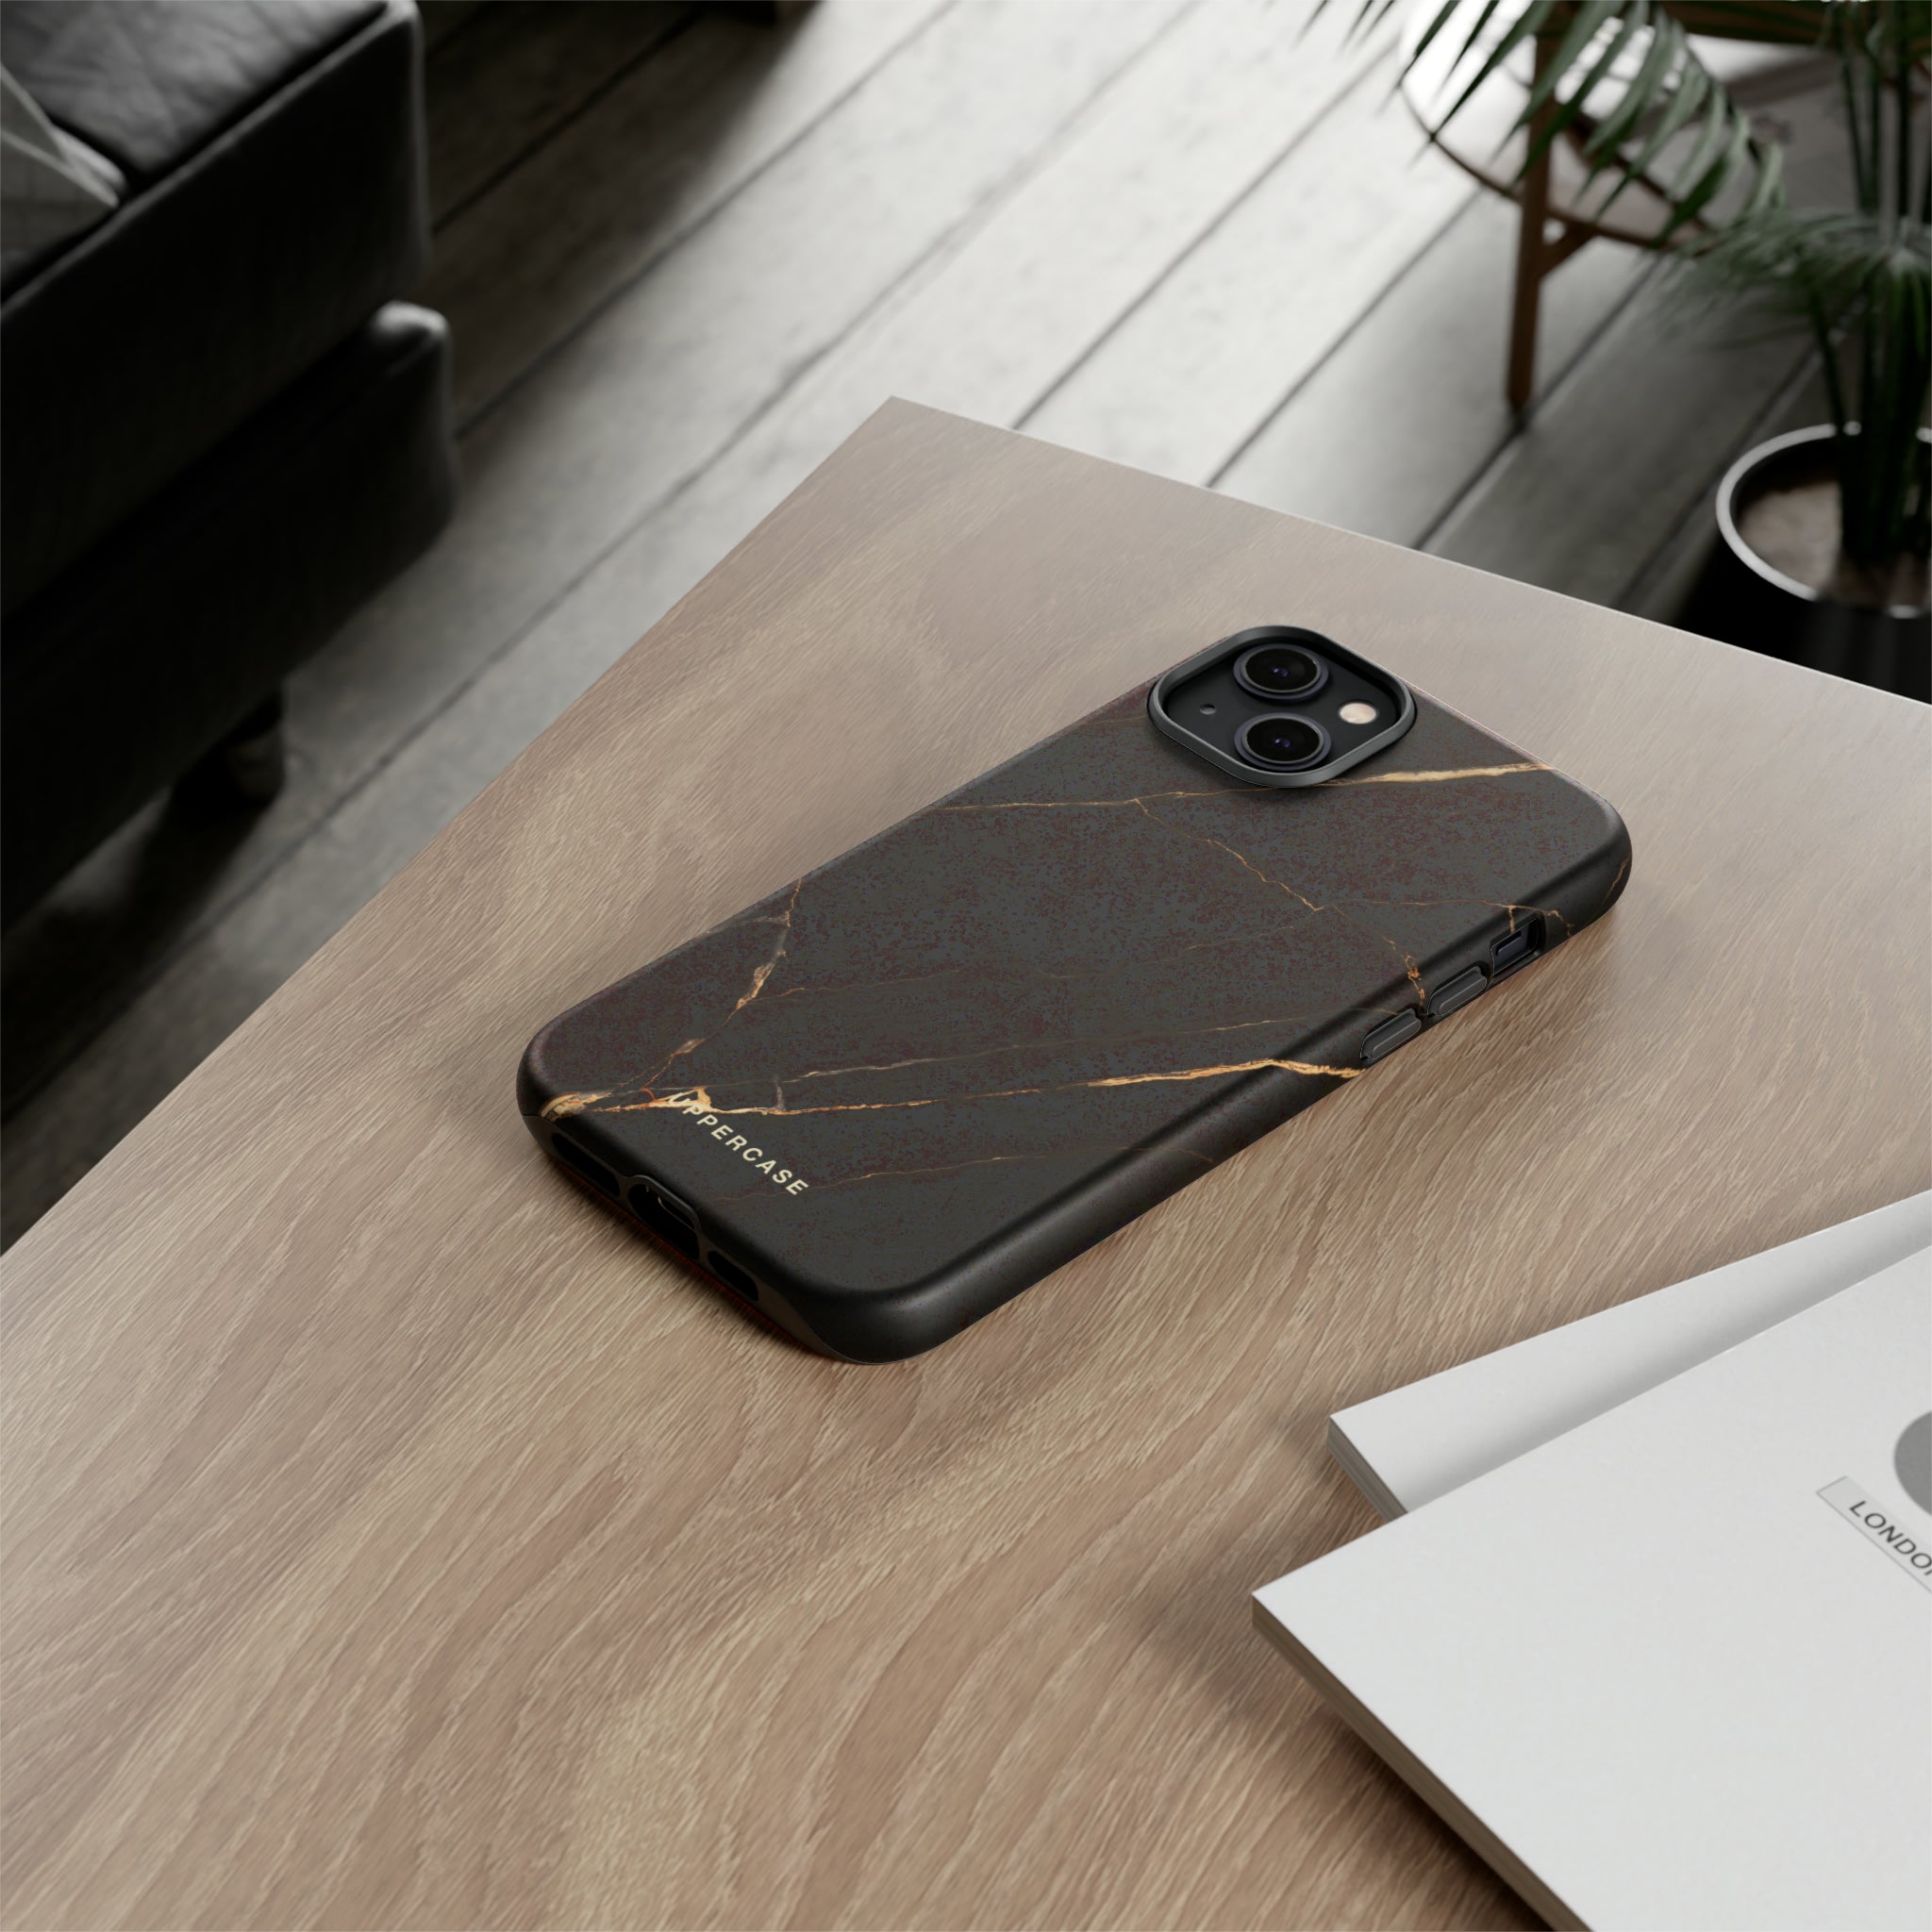 Royal Marble - Personalised Strong Case